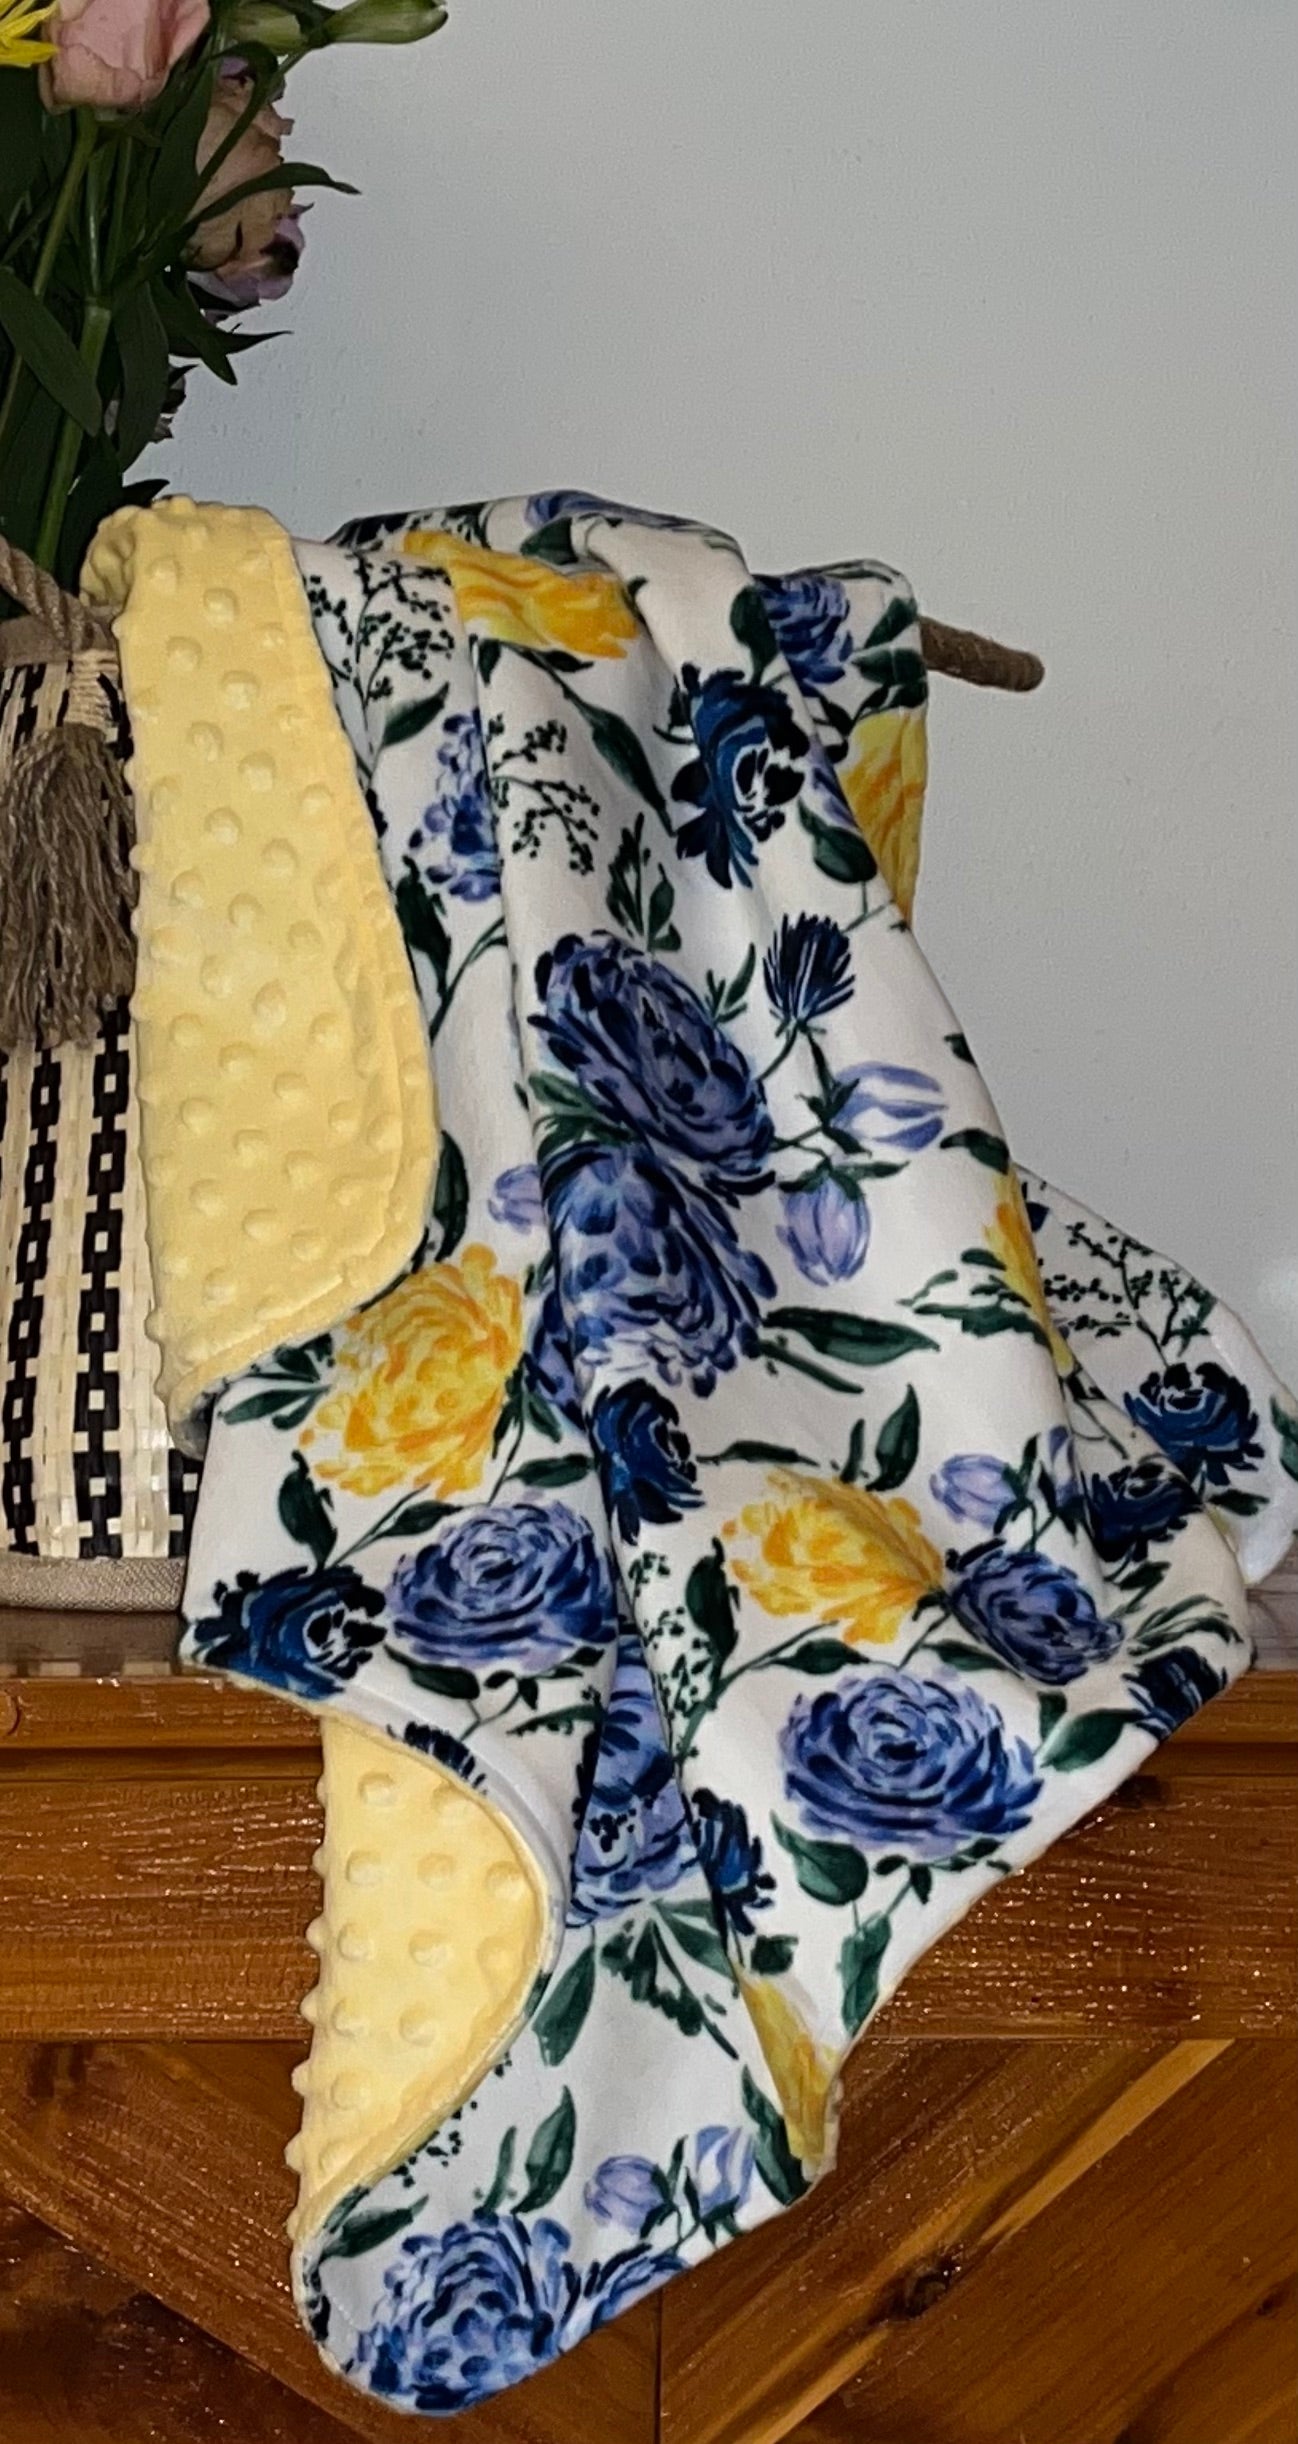 Hyber-Native Blue & Yellow Floral Receiving Blanket